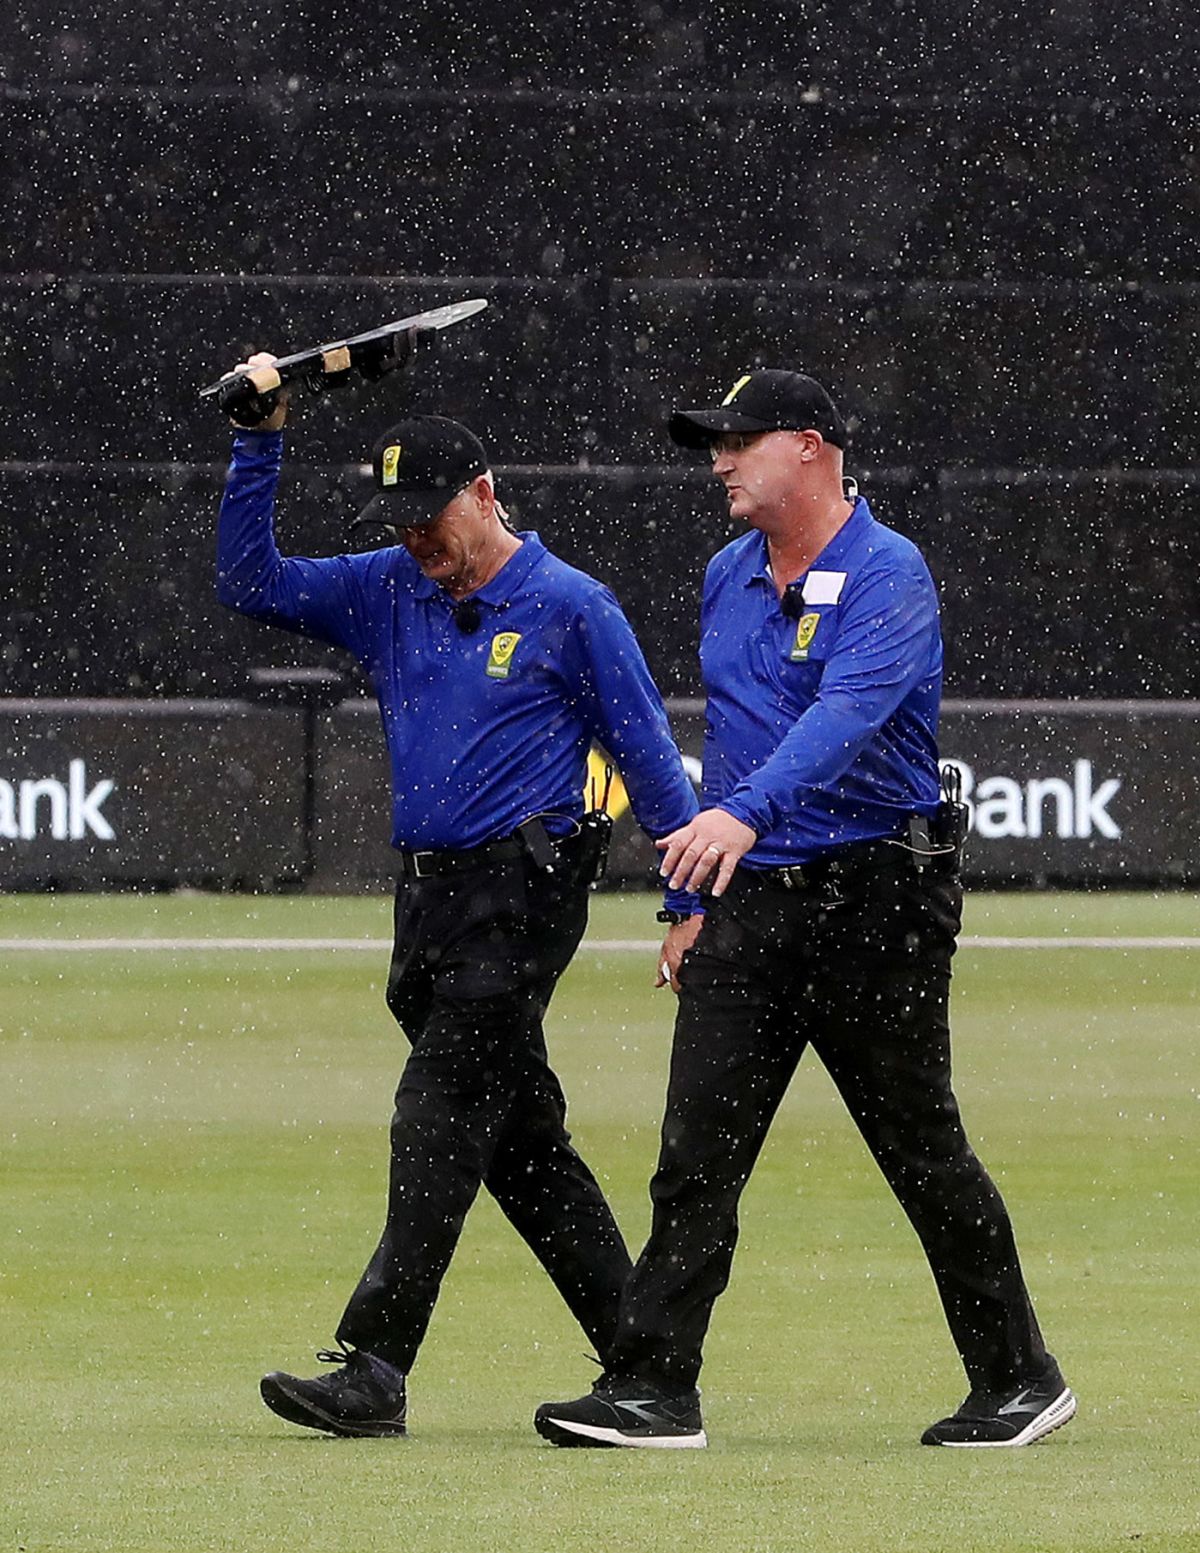 Bruce Oxenford finds another use for his shield, Australia vs England, 2nd T20I, Adelaide, January 22, 2022